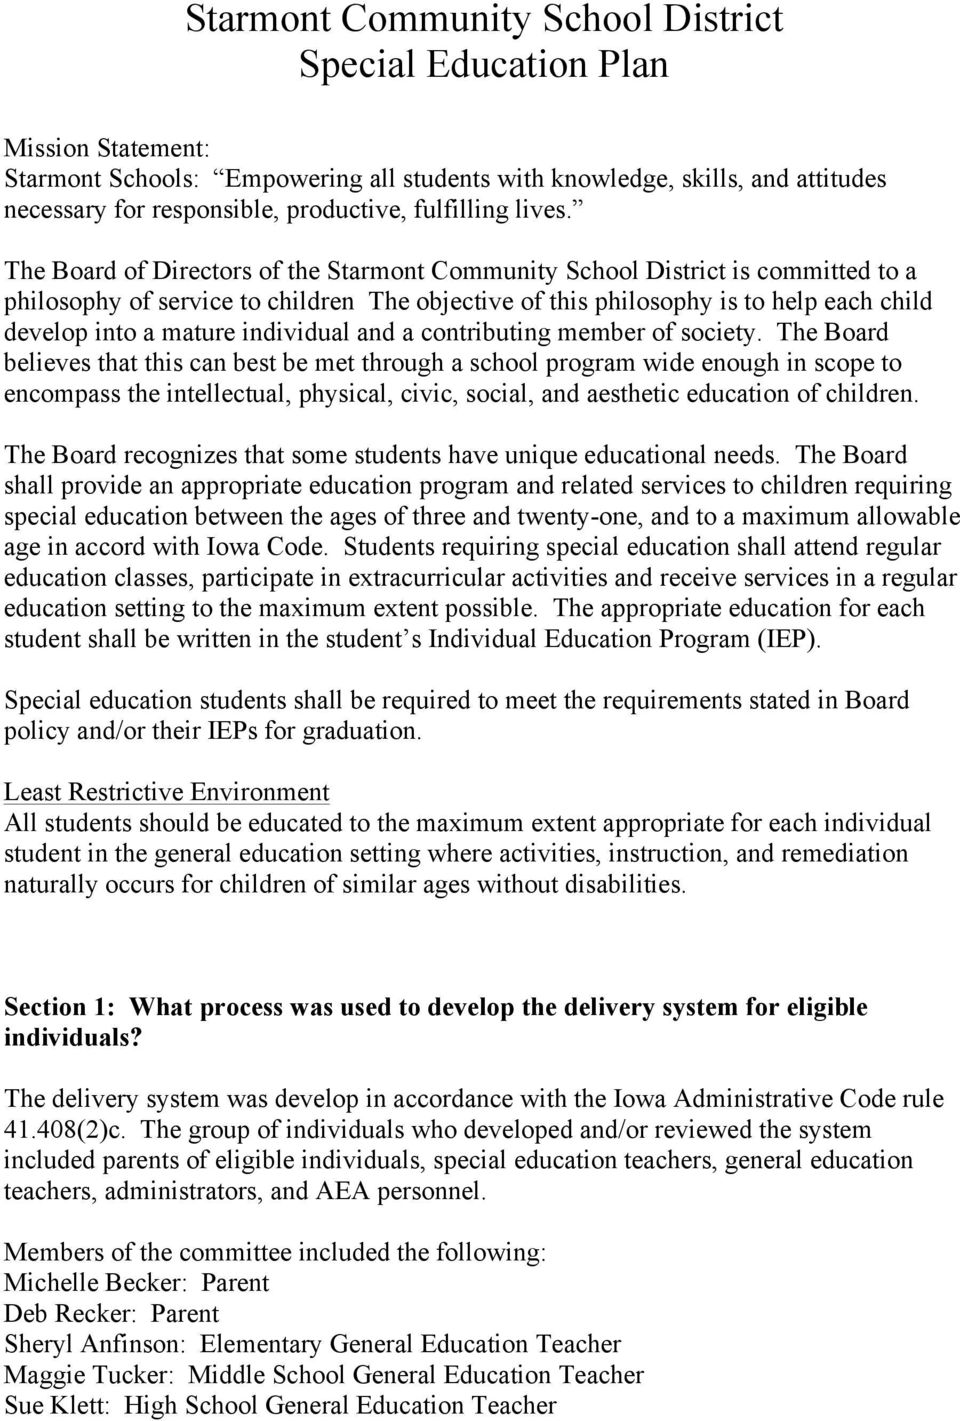 The Board of Directors of the Starmont Community School District is committed to a philosophy of service to children The objective of this philosophy is to help each child develop into a mature